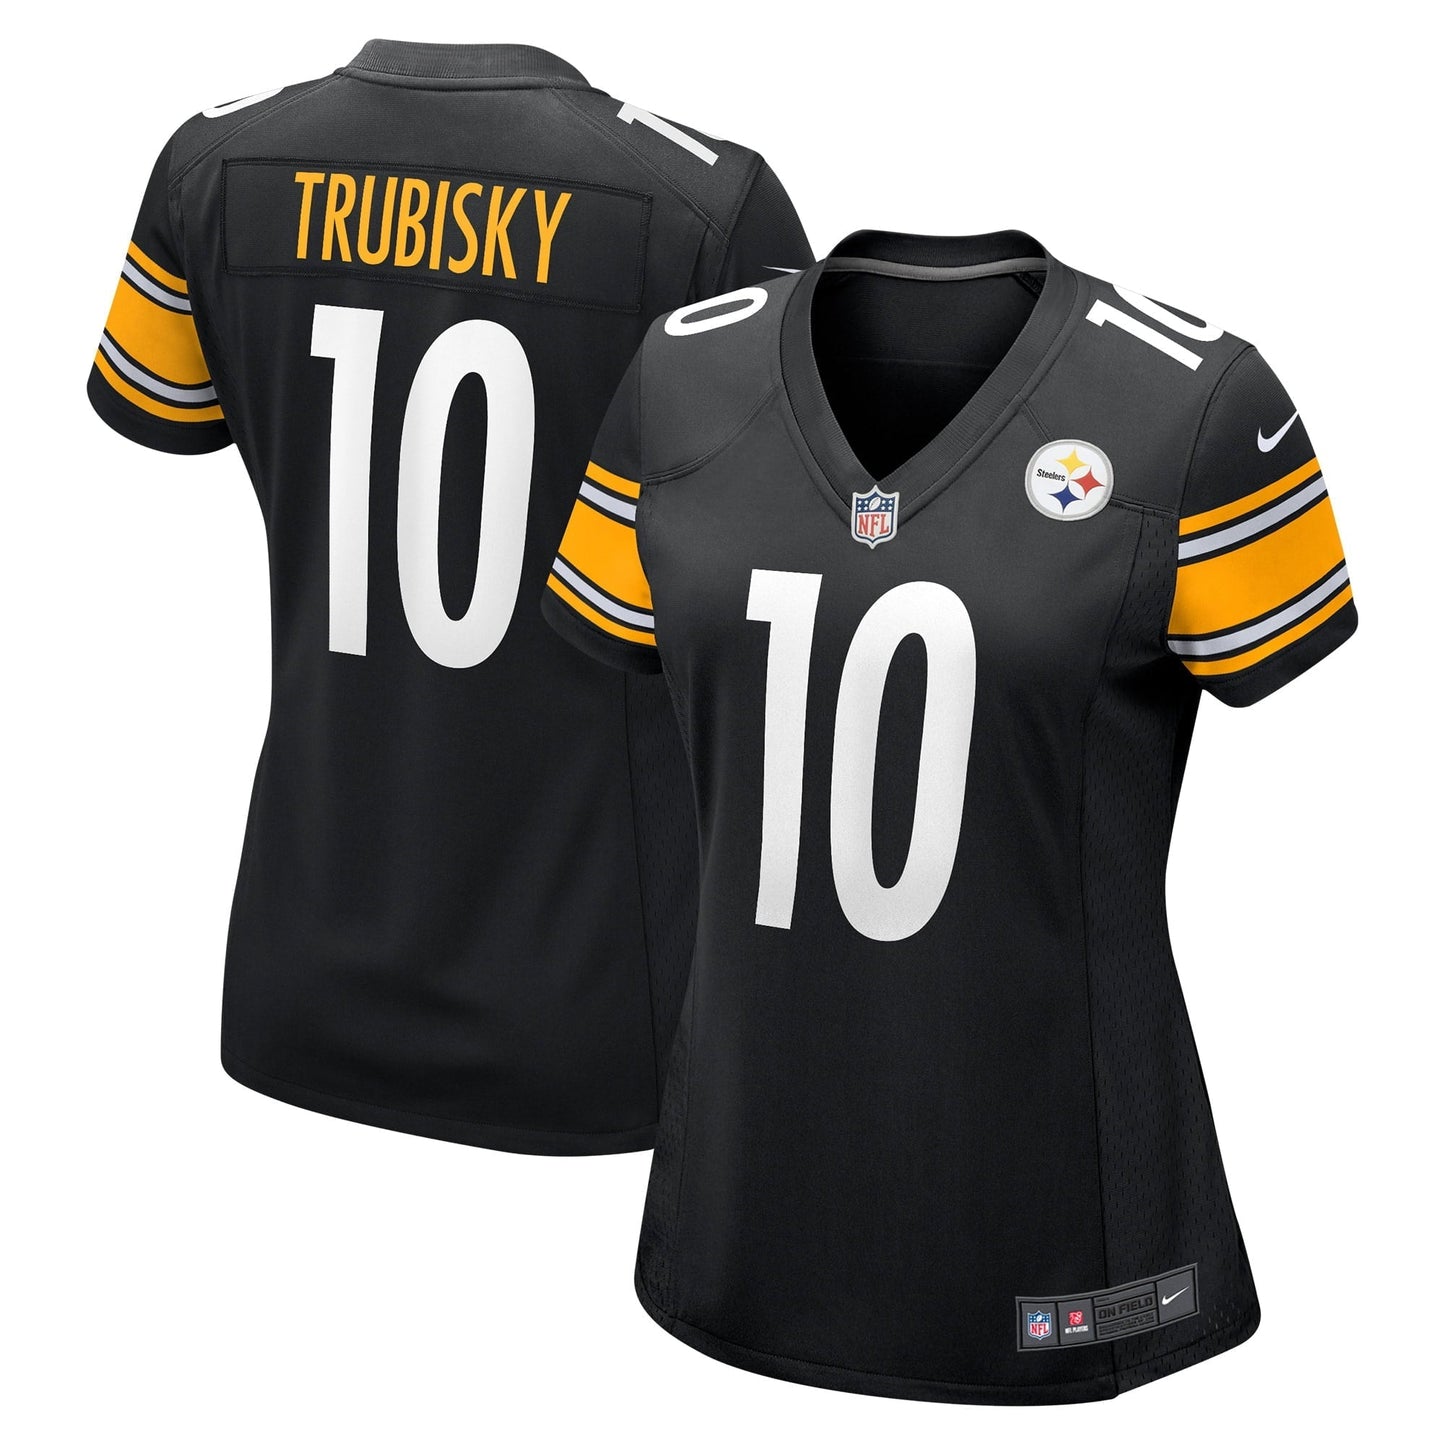 Women's Nike Mitchell Trubisky Black Pittsburgh Steelers Game Jersey